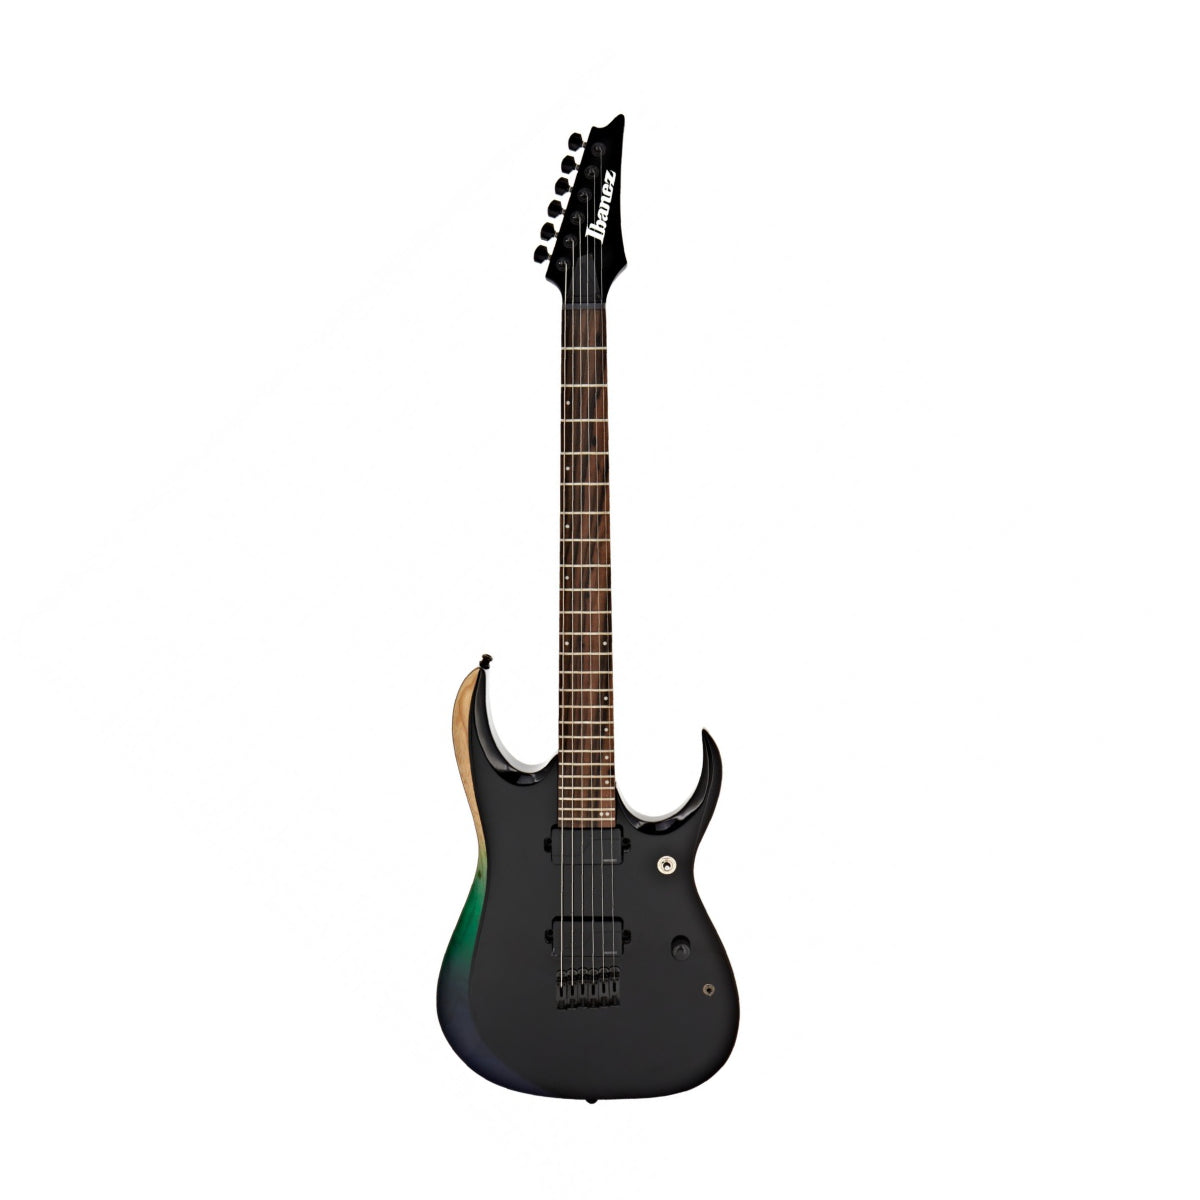 Ibanez RGD Axion Label Series